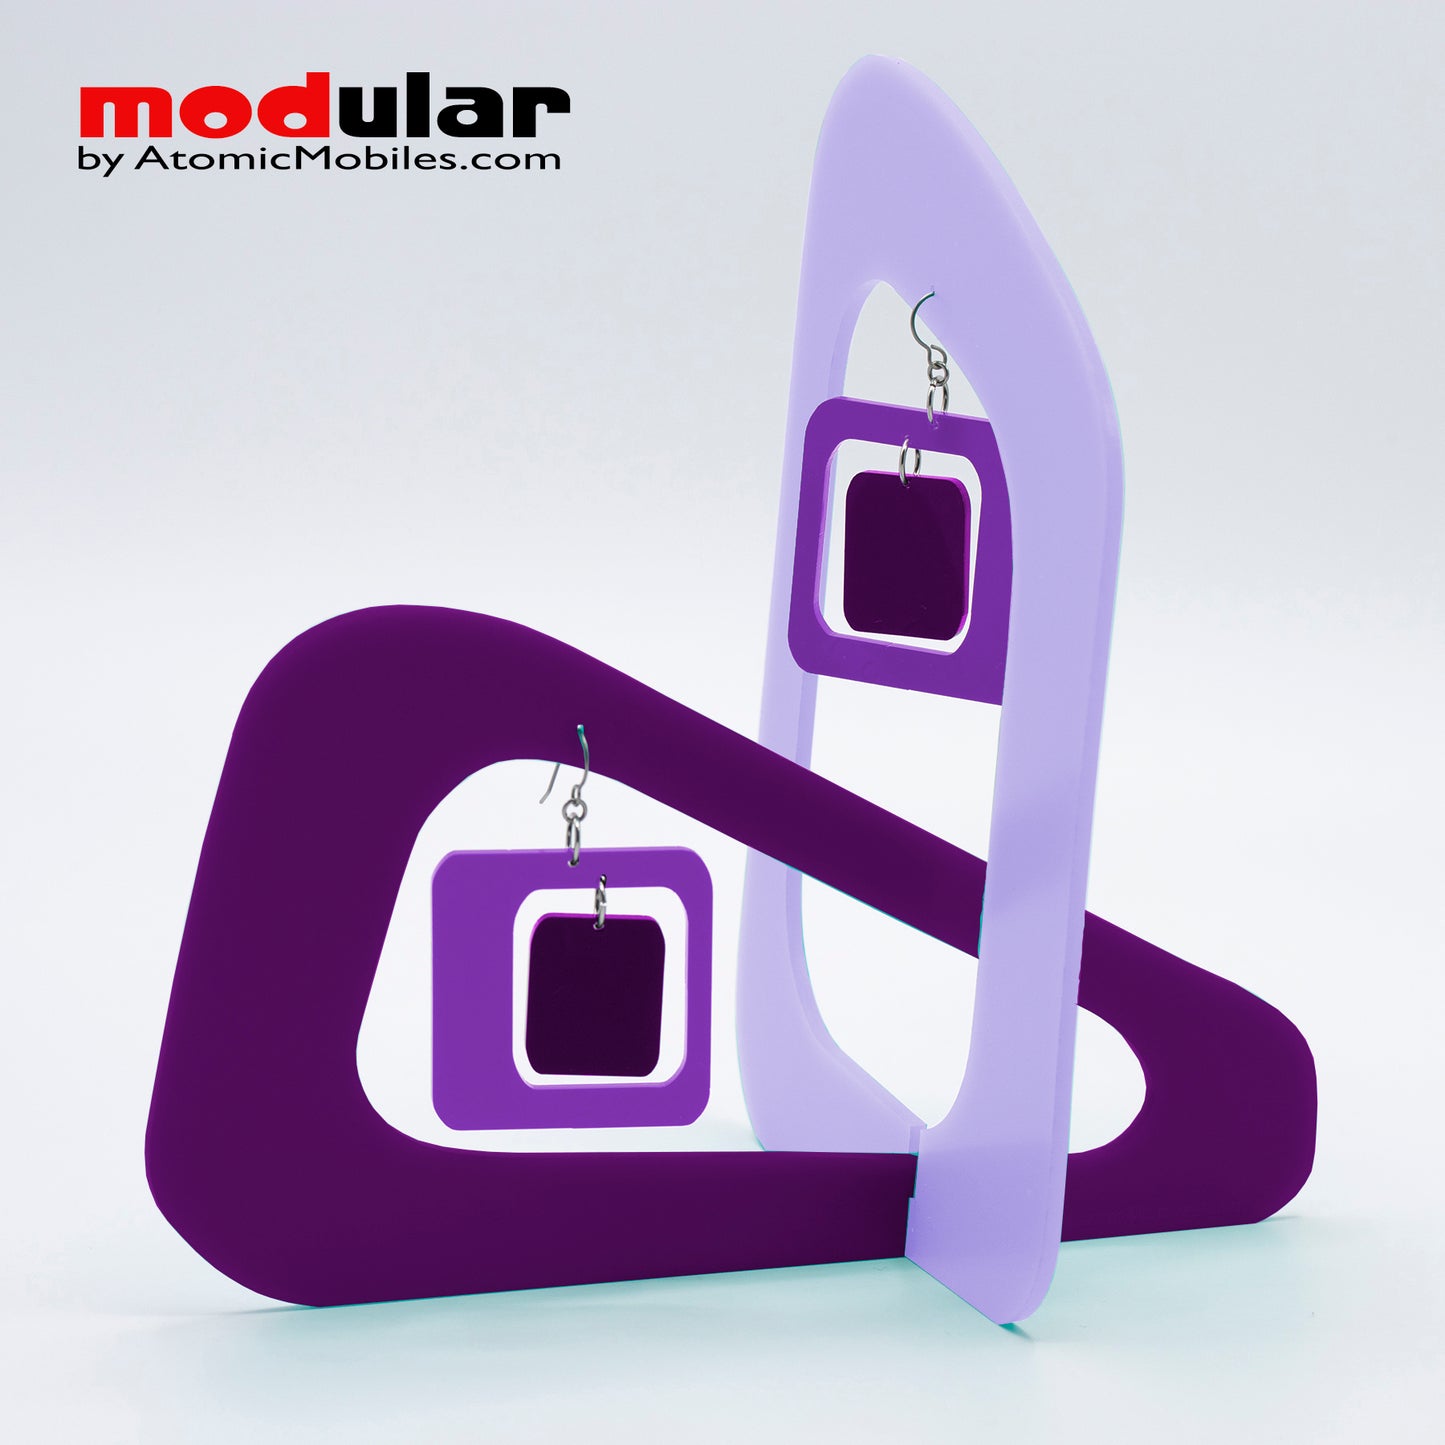 Handmade Coolsville mod style earrings and stabile kinetic modern art sculpture in shades of Purple by AtomicMobiles.com